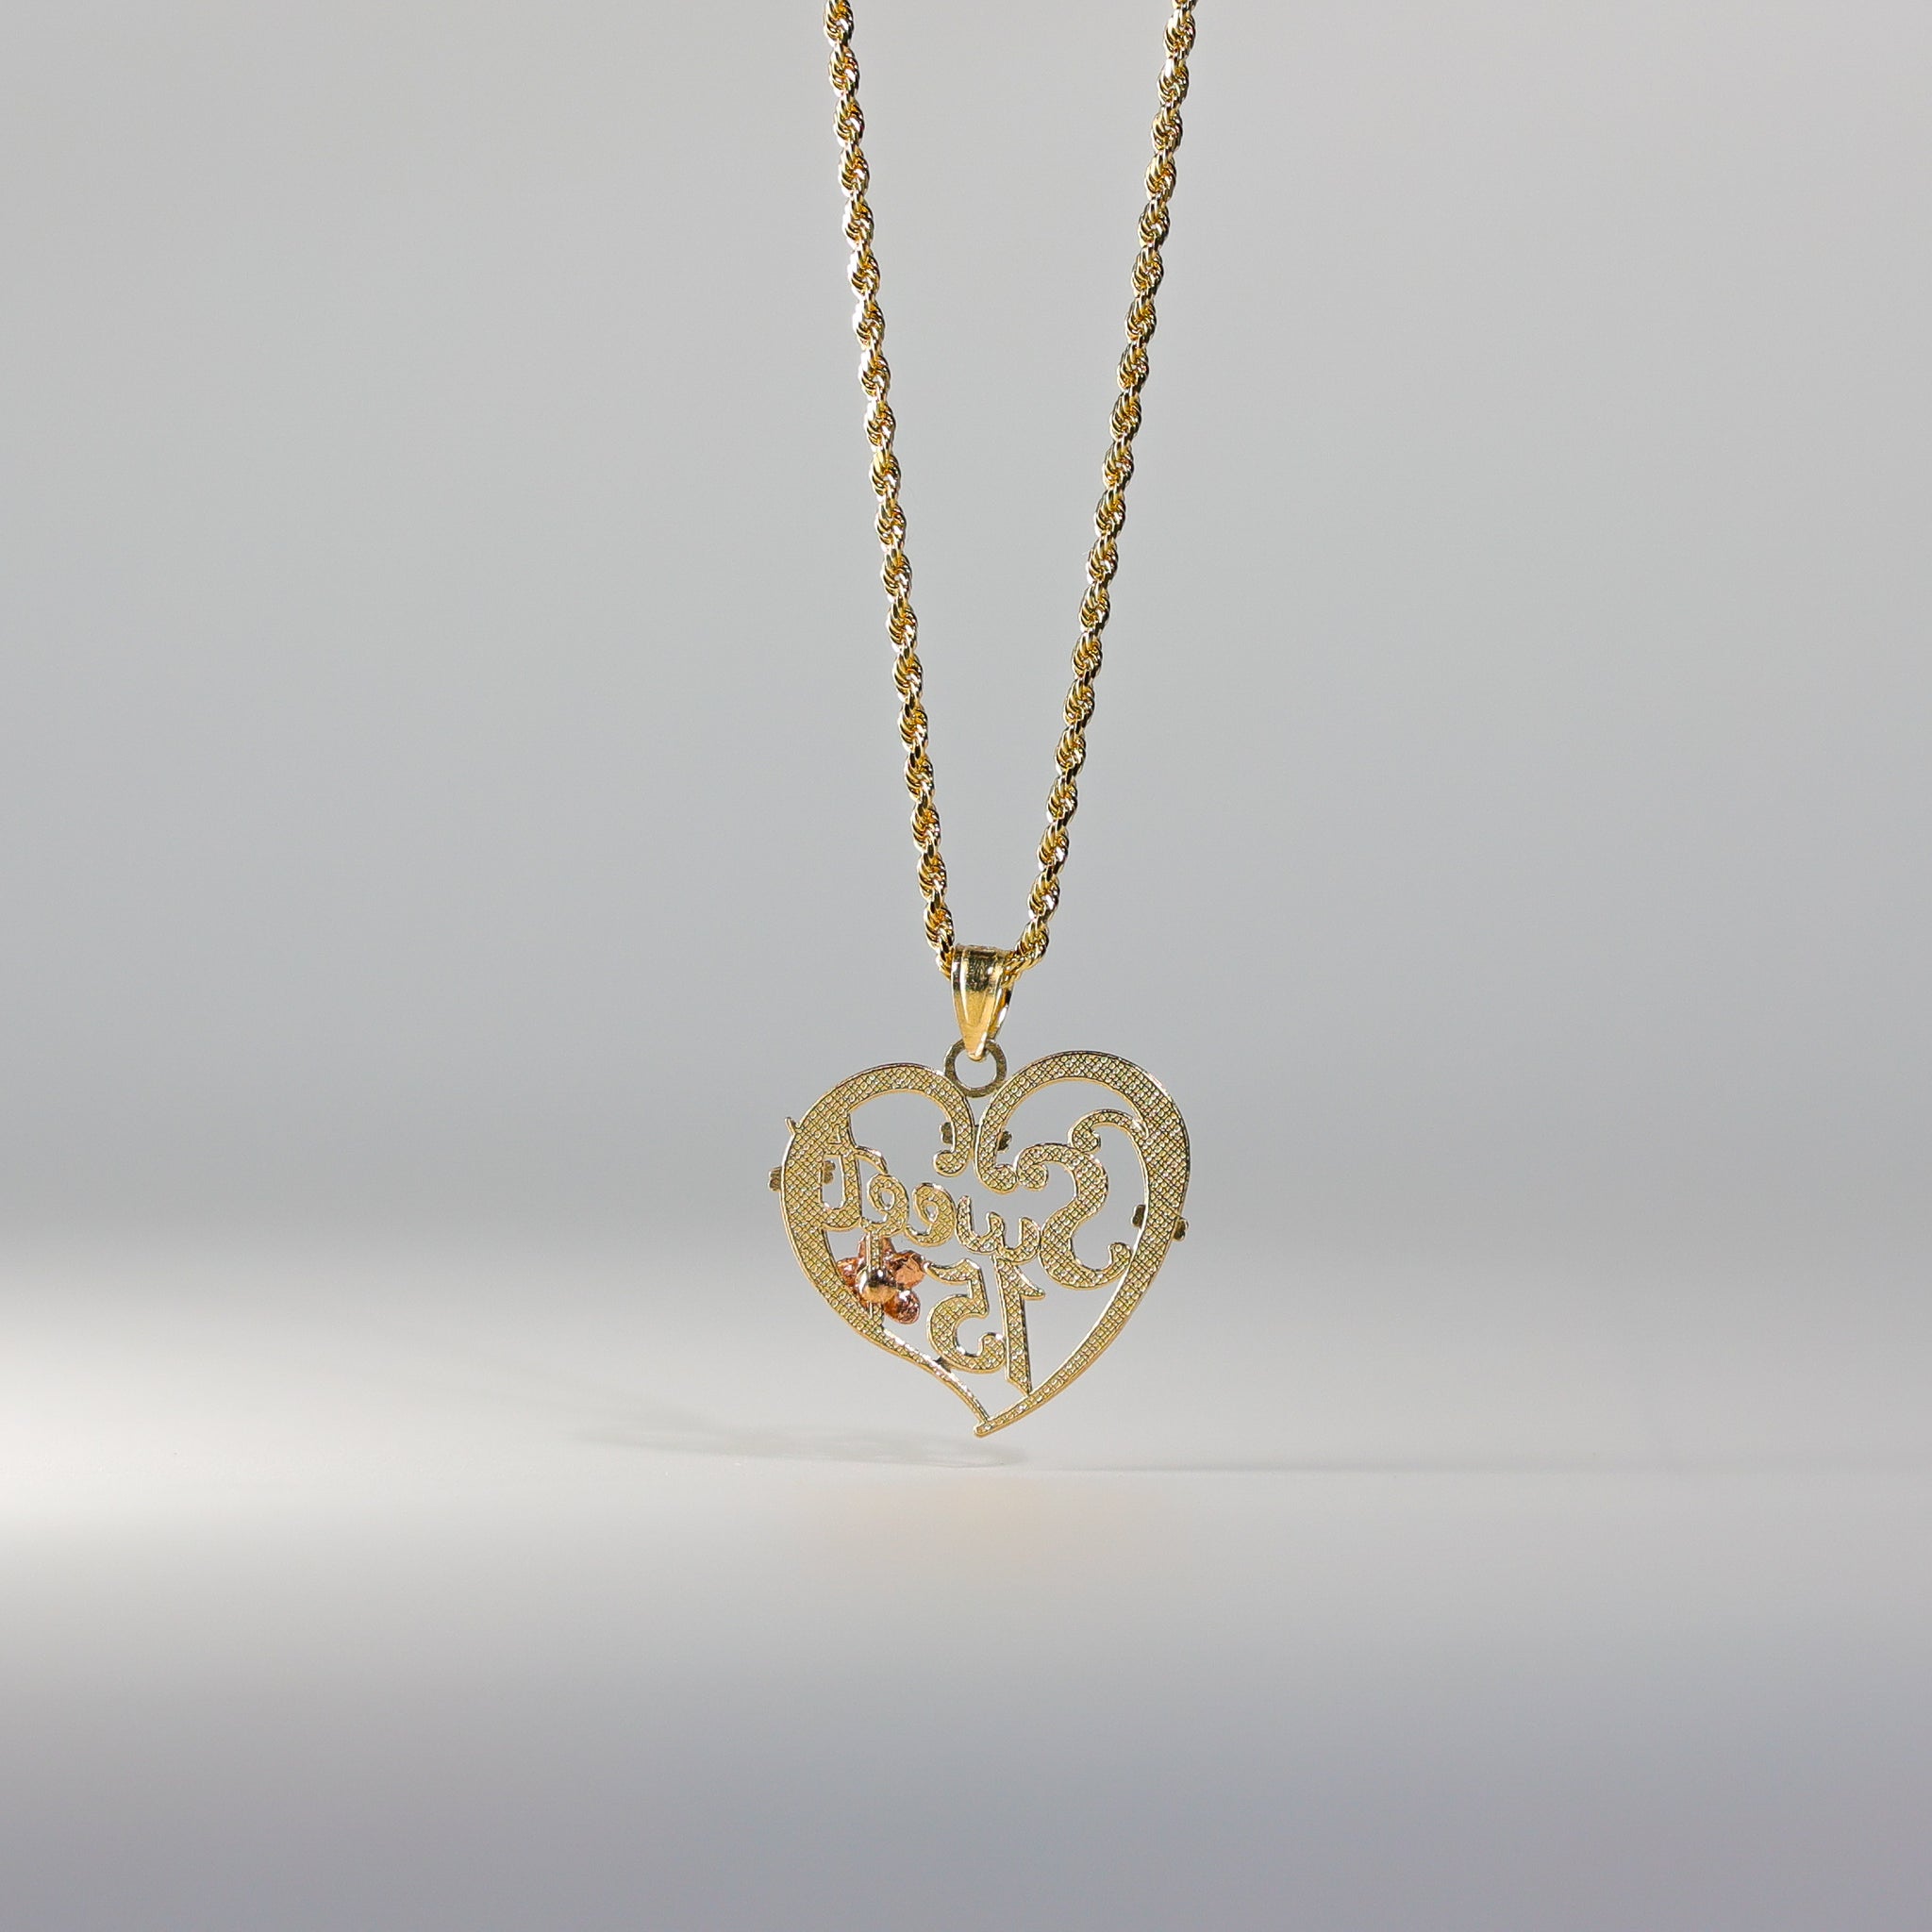 Gold 3 Colors 15 Years Heart Pendant Model-1906 - Charlie & Co. Jewelry